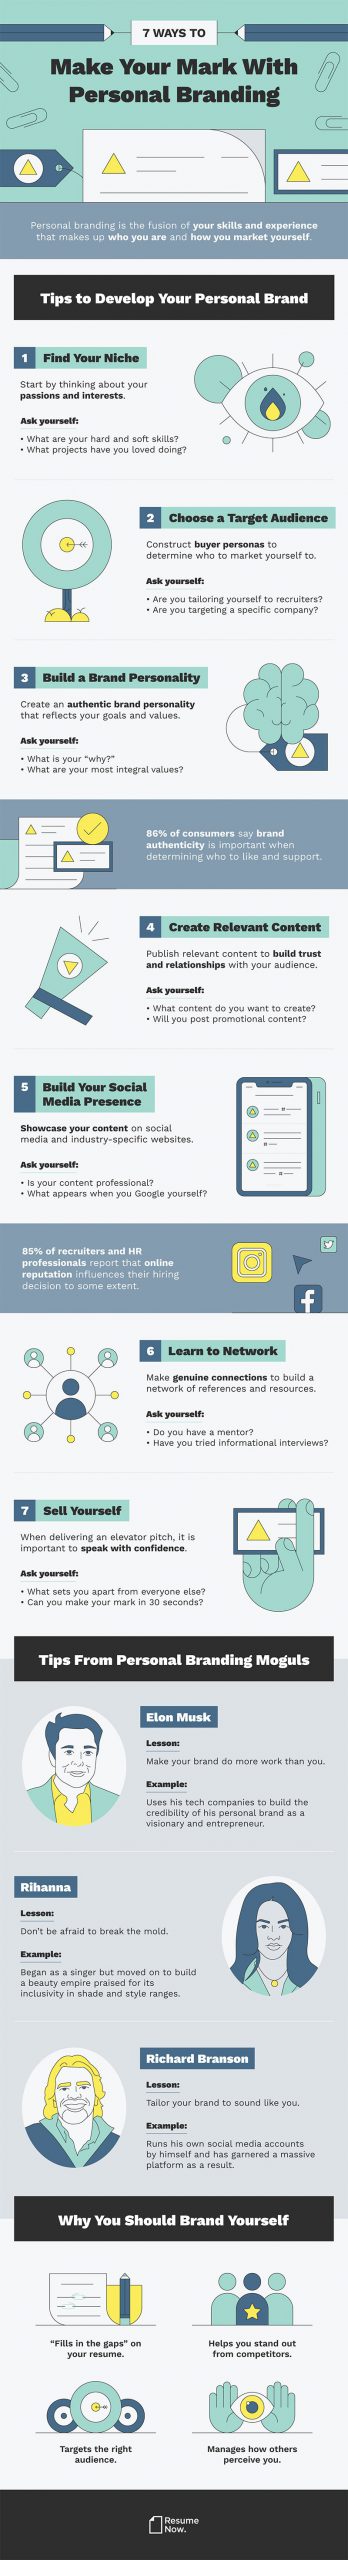 7 clever tips to develop your personal brand win more clients infographic scaled 1